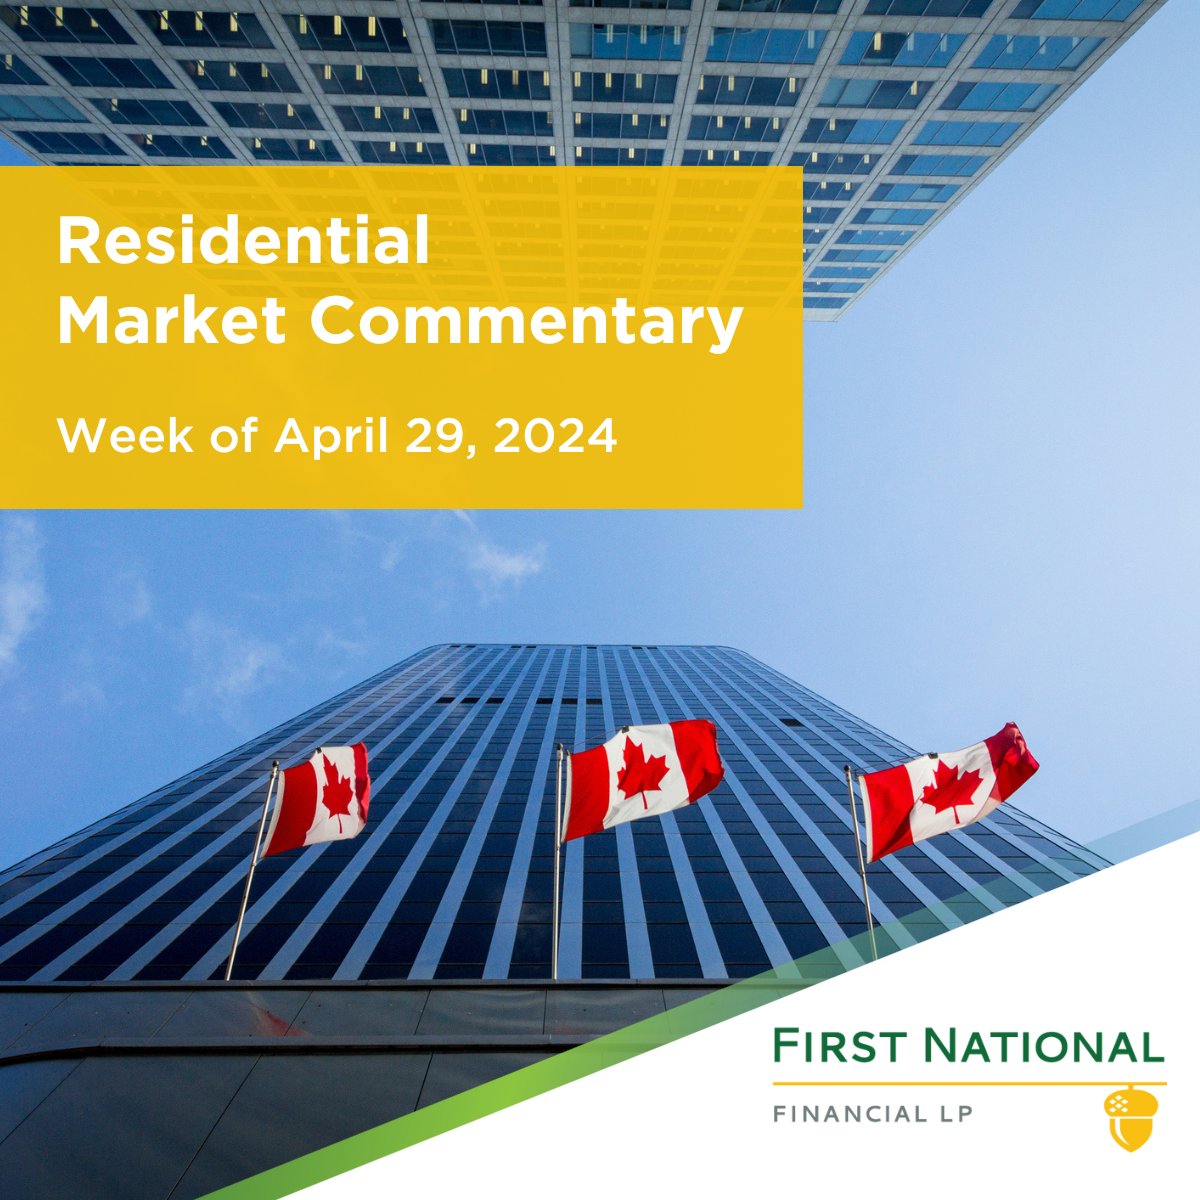 Residential Market Commentary, Week of April 29: @bankofcanada Summary of Deliberations sheds some light on when “gradual” #interestrate cuts may start.
firstnational.ca/mortgage-broke…